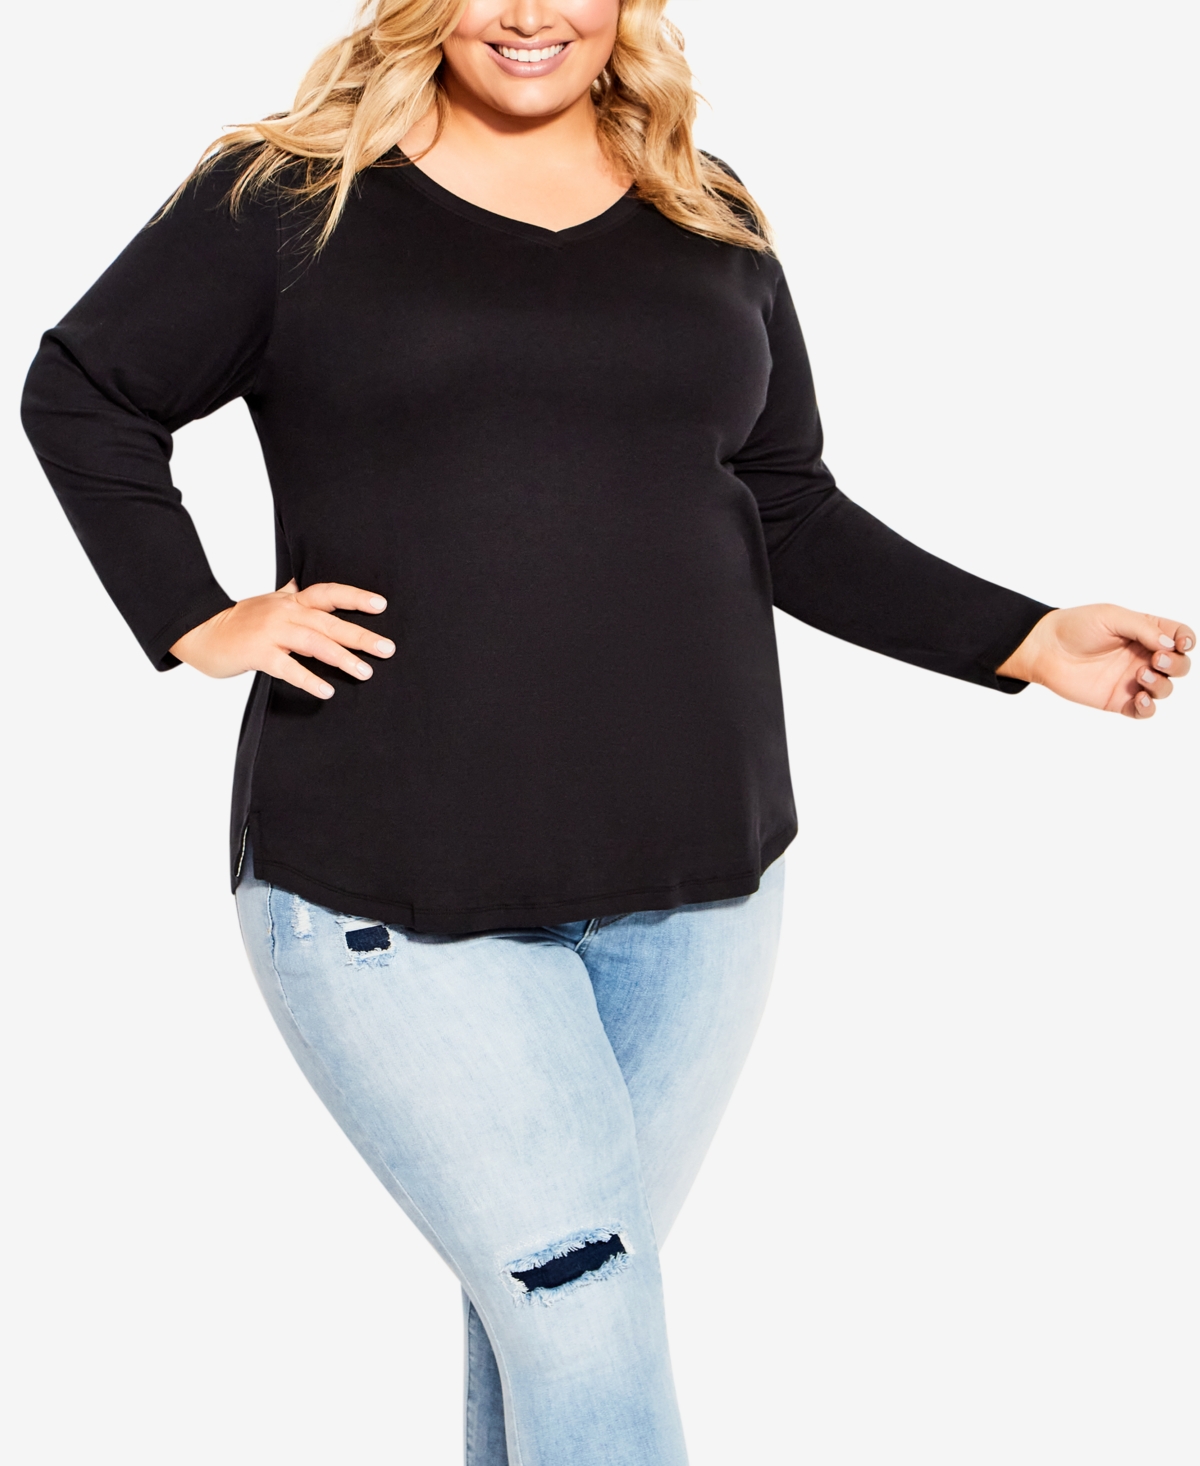 Plus Size V Neck Essential Long Sleeve T-Shirt - Teal